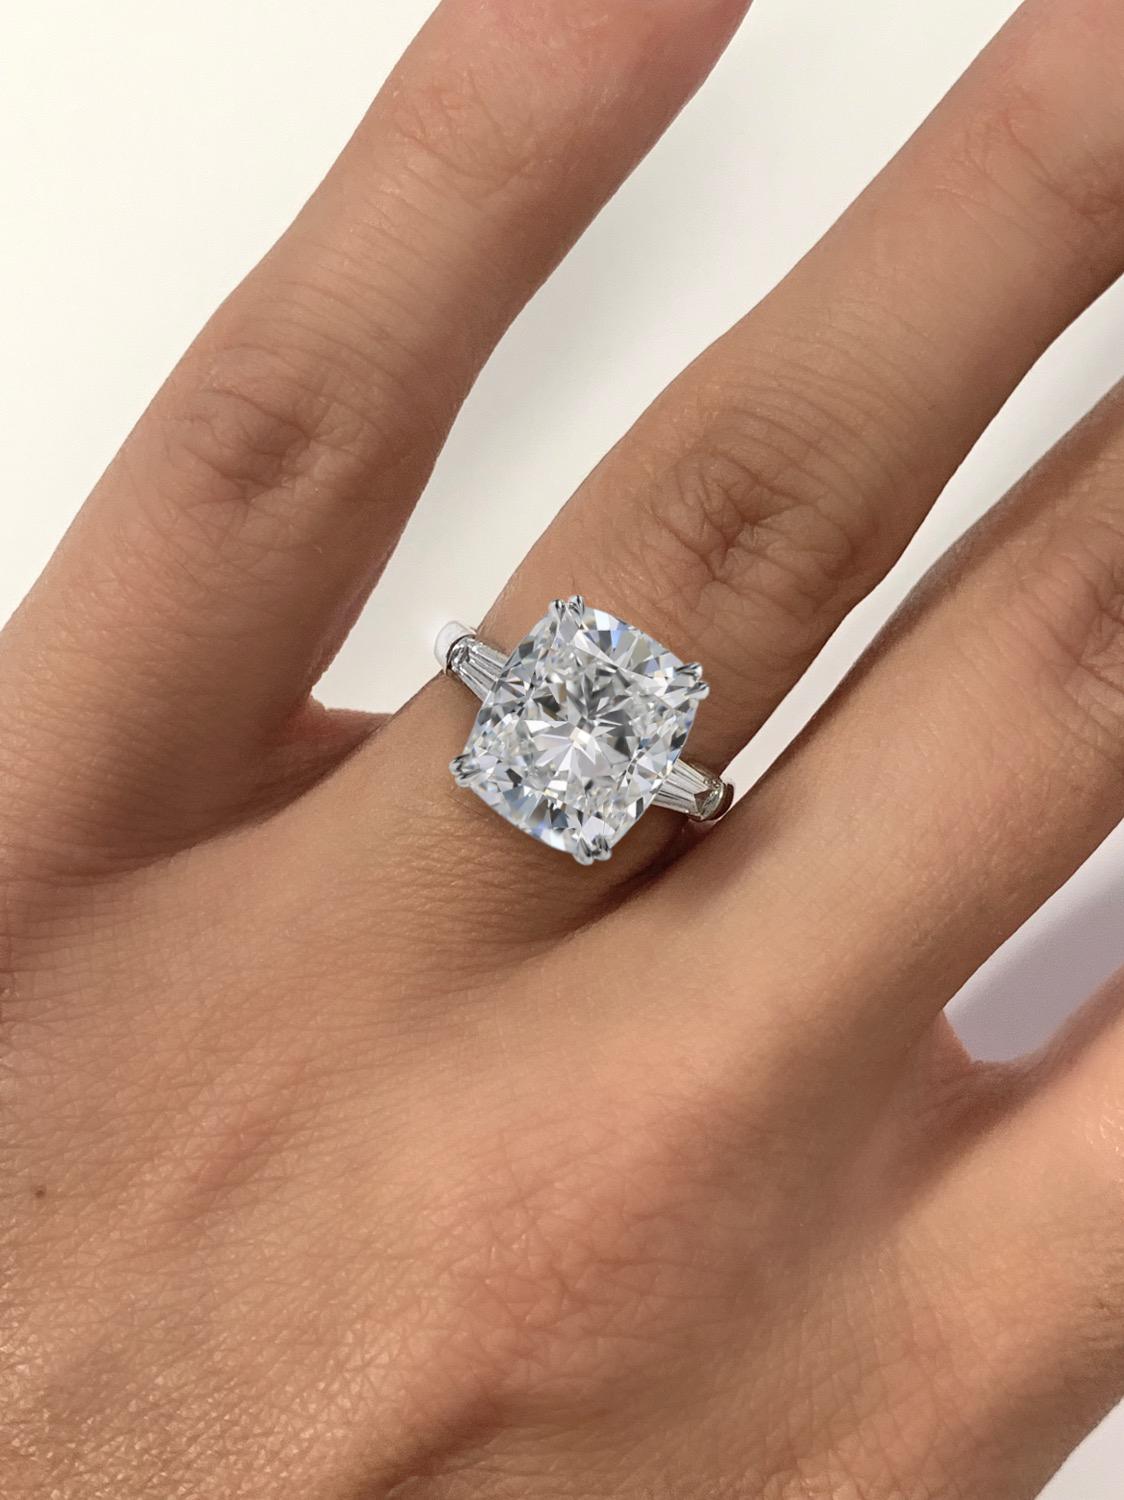 Handmade in Italy this 3 carat cushion cut diamond engagement ring is stunning. The center stone has been certified by the Gemological Instute of America. The shape and cutting style is a cushion modified brilliant. It weighs 3 carats and is a g in